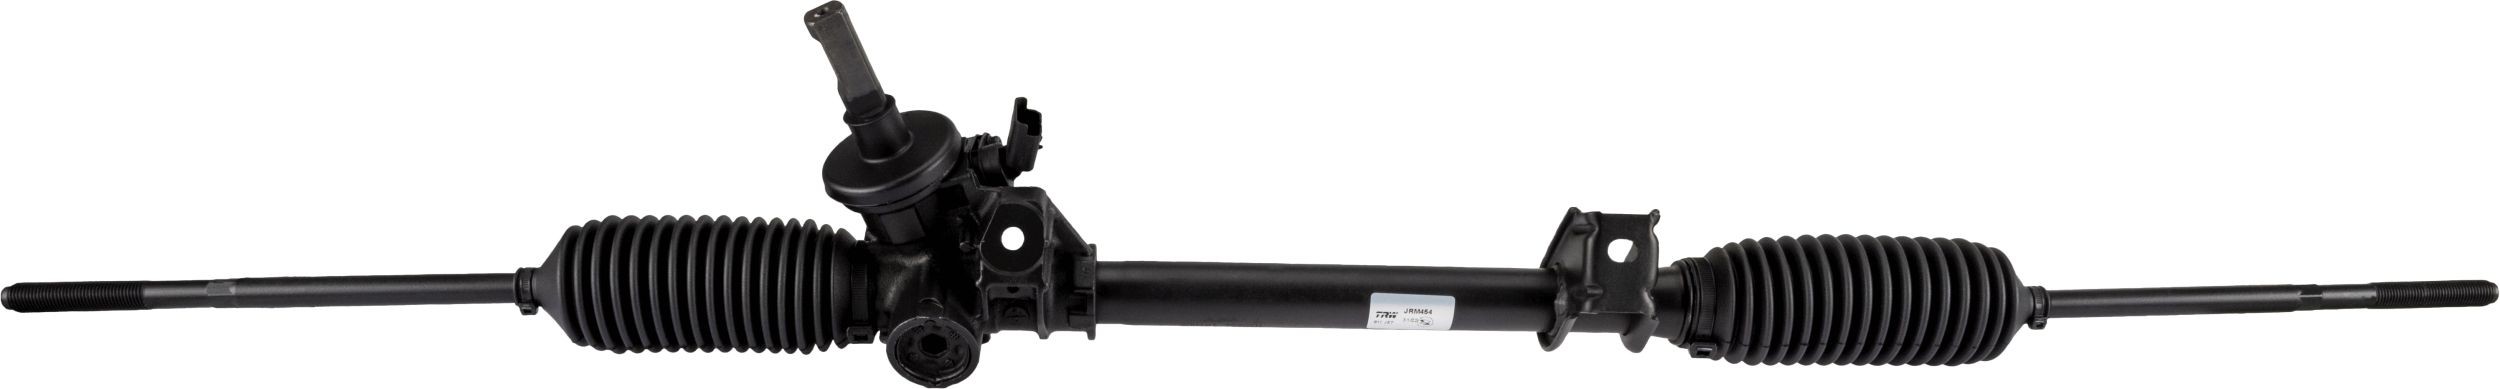 JRM454 TRW Power steering rack HONDA Mechanical, for left-hand drive vehicles, untoothed, 1110 mm